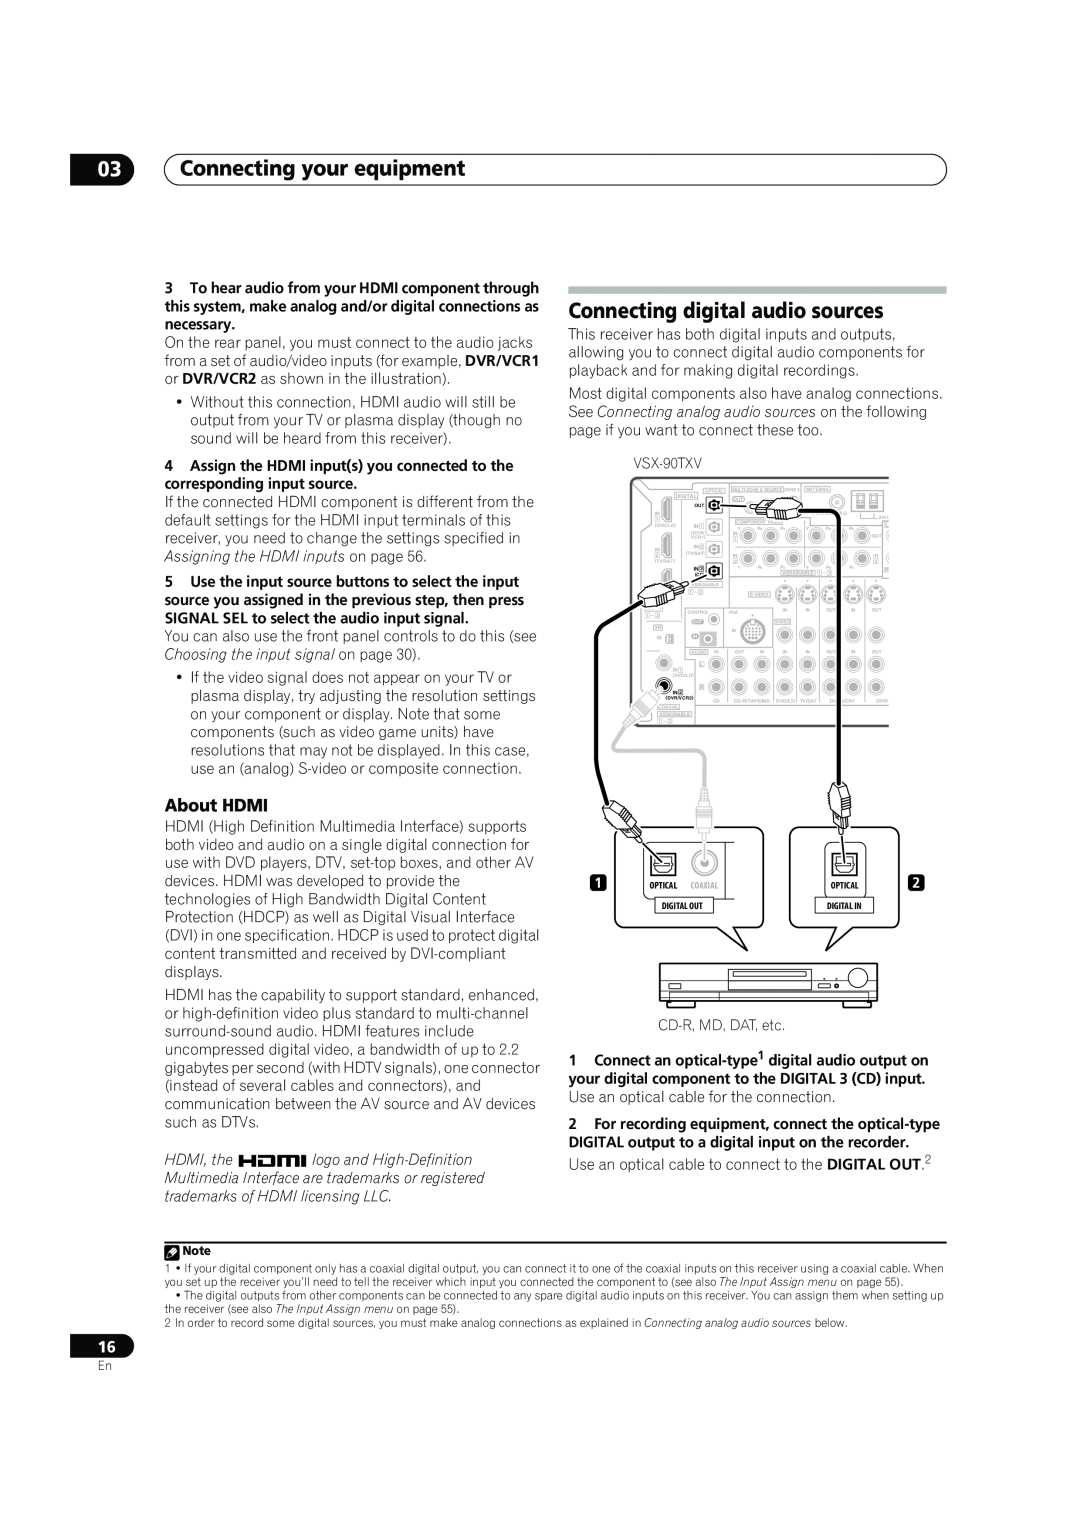 Pioneer VSX-90TXV operating instructions Connecting digital audio sources, About HDMI, 03Connecting your equipment 